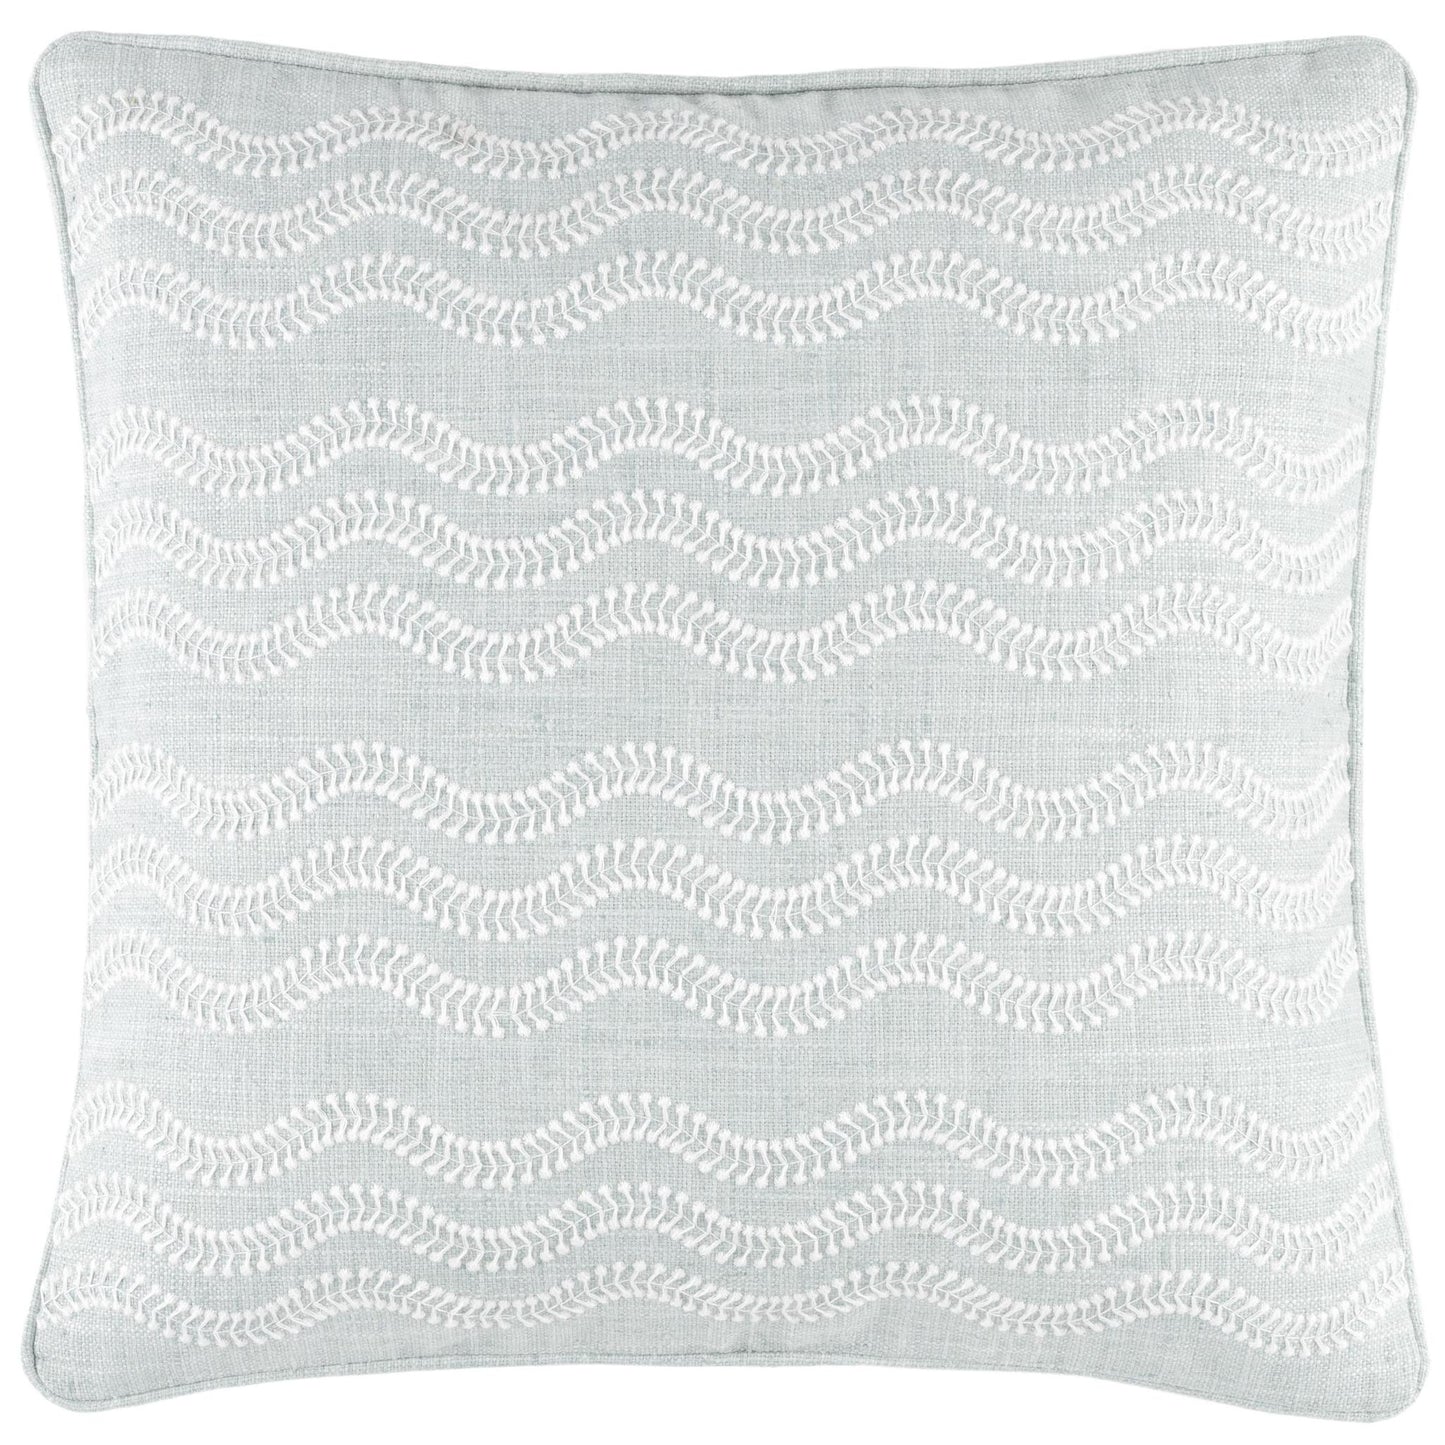 Pillow - "Scout" Embroidered Sky - Indoor/Outdoor - 20"